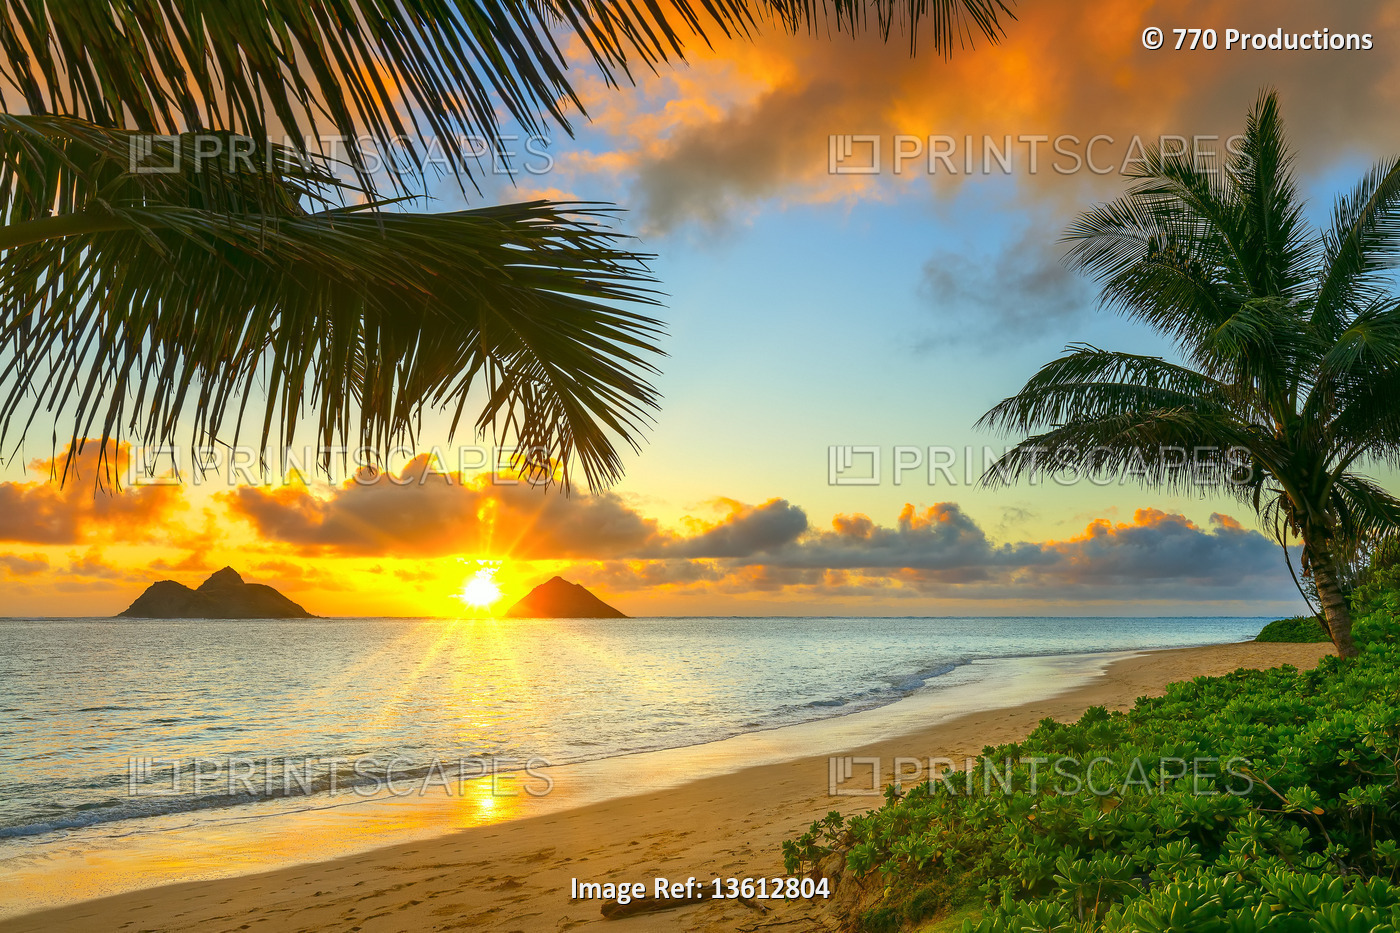 Sunrise viewed from Lanikai Beach with a view of the Mokulua Islands off the ...